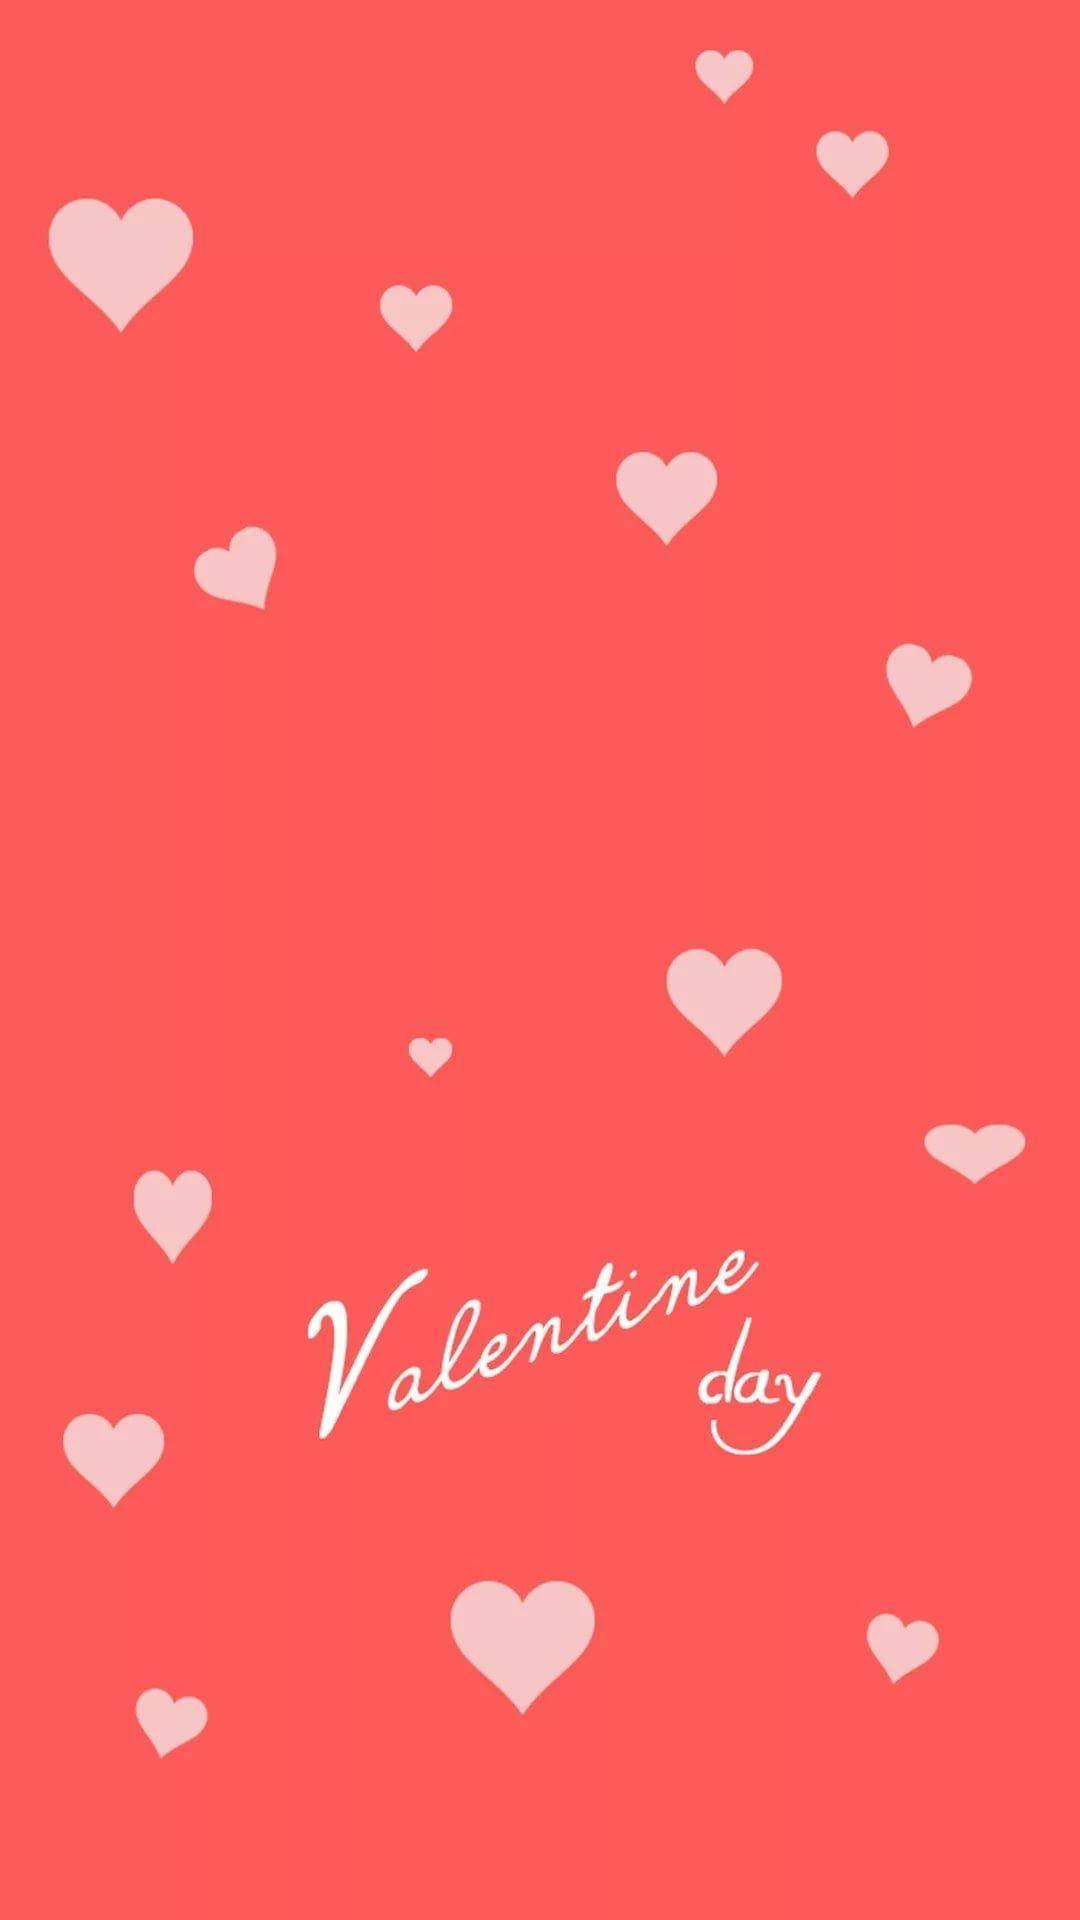 Celebrate Valentine's day with those that mean the most! Wallpaper